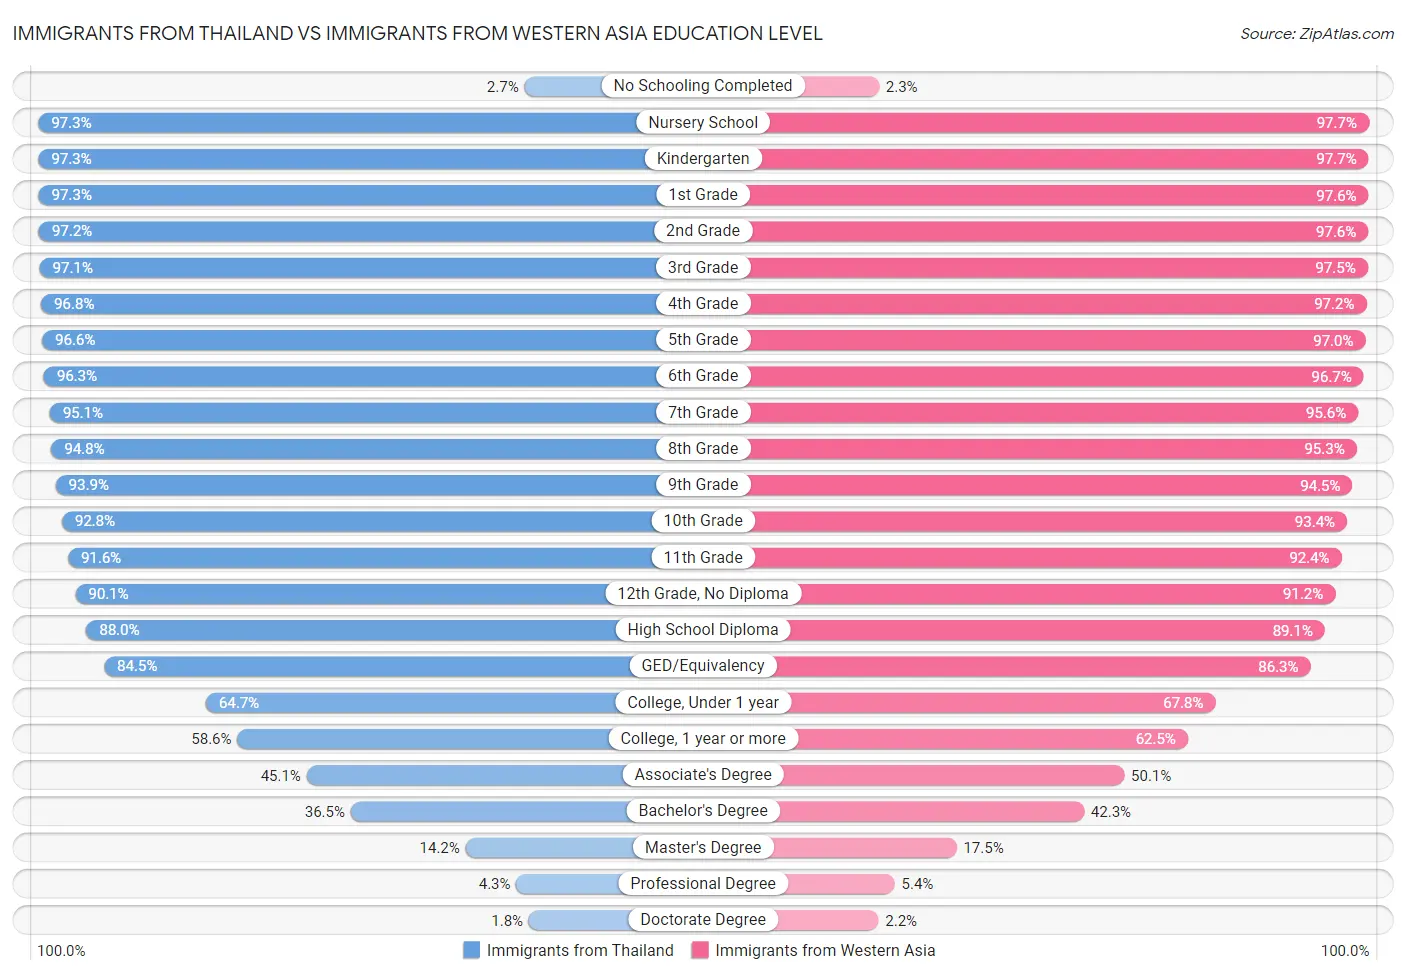 Immigrants from Thailand vs Immigrants from Western Asia Education Level